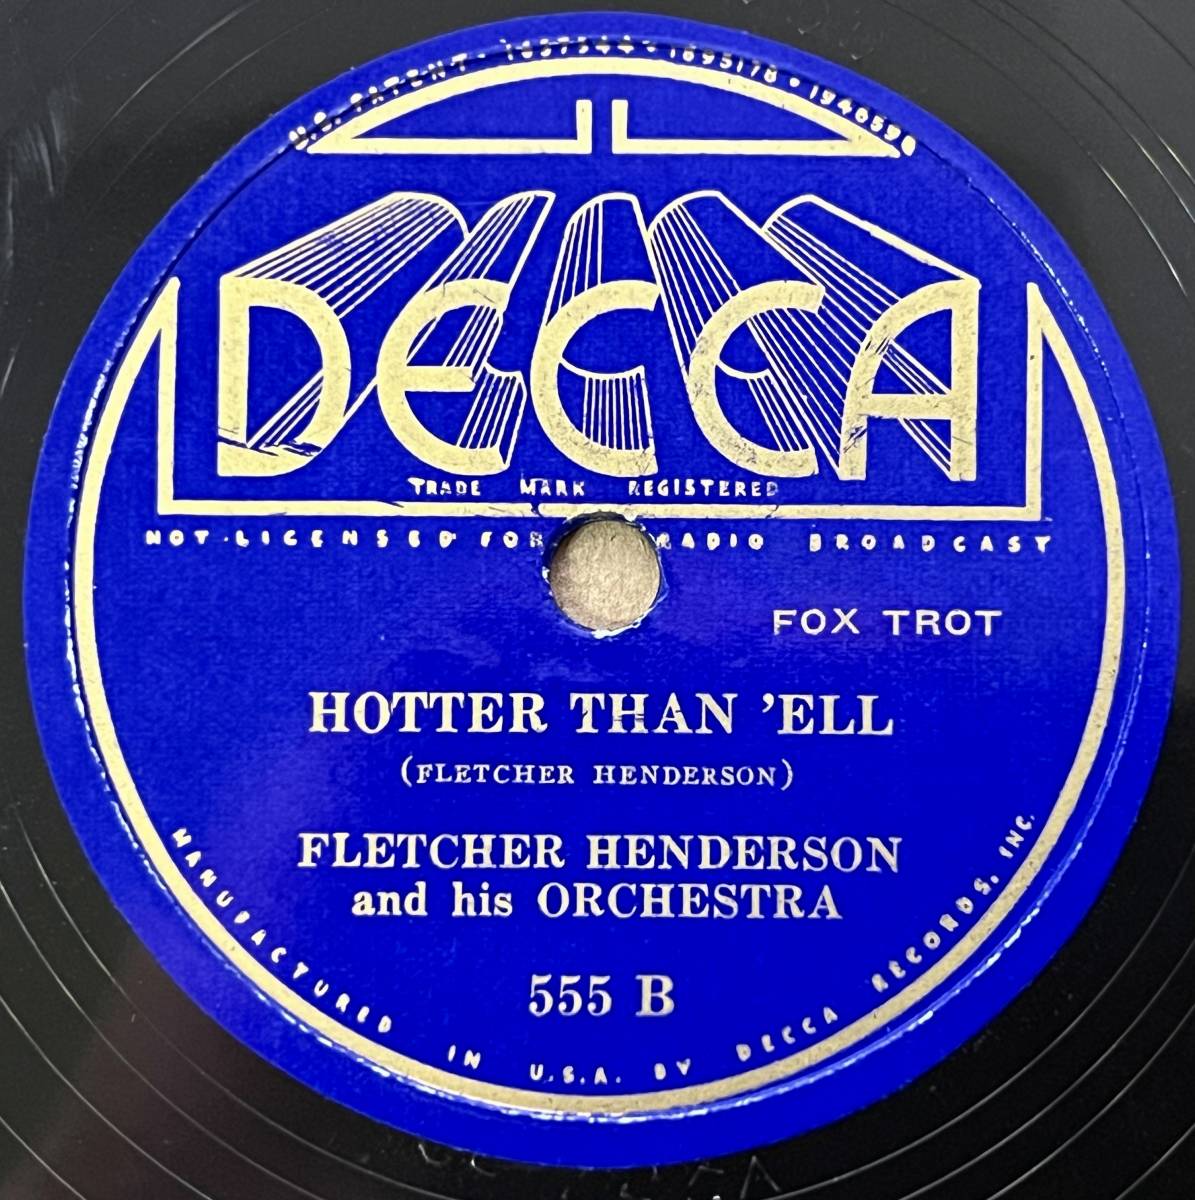 FLETCHER HENDERSON AND HIS ORCH. DECCA Hotter Than ‘Ell HOT!